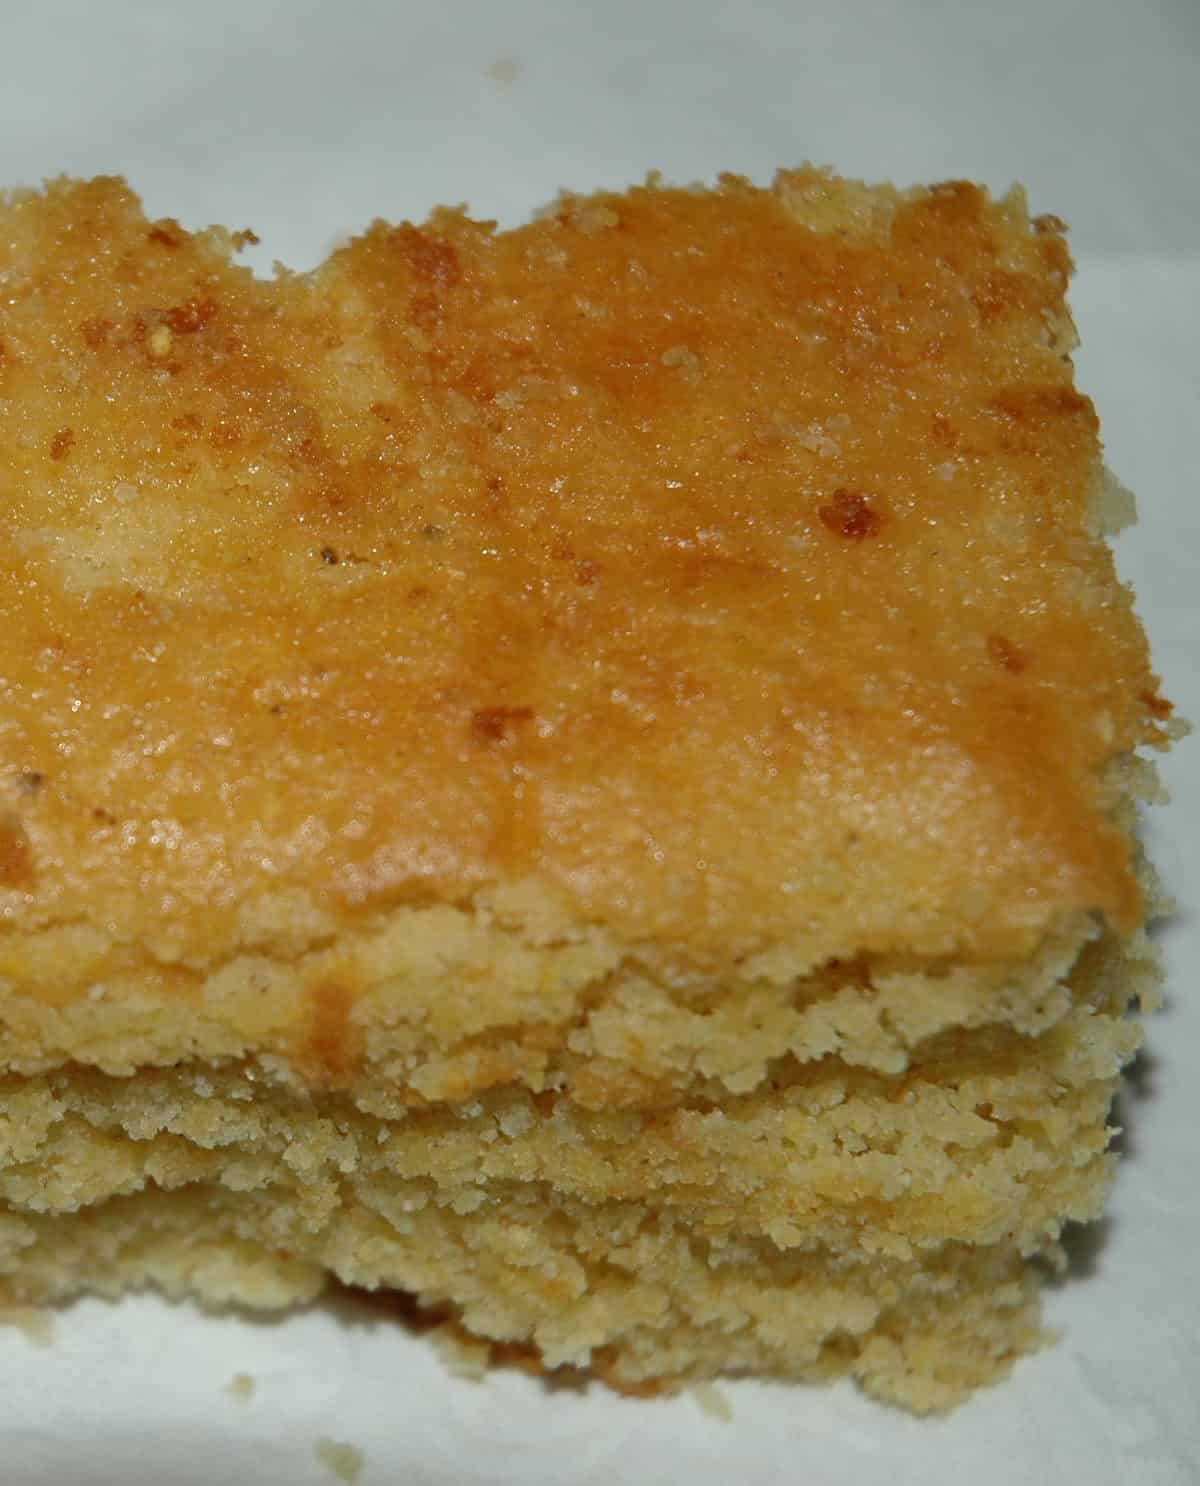  With this Moist Johnny Cake recipe, you won't need to leave the comfort of your home to savor the perfect cornmeal cake.